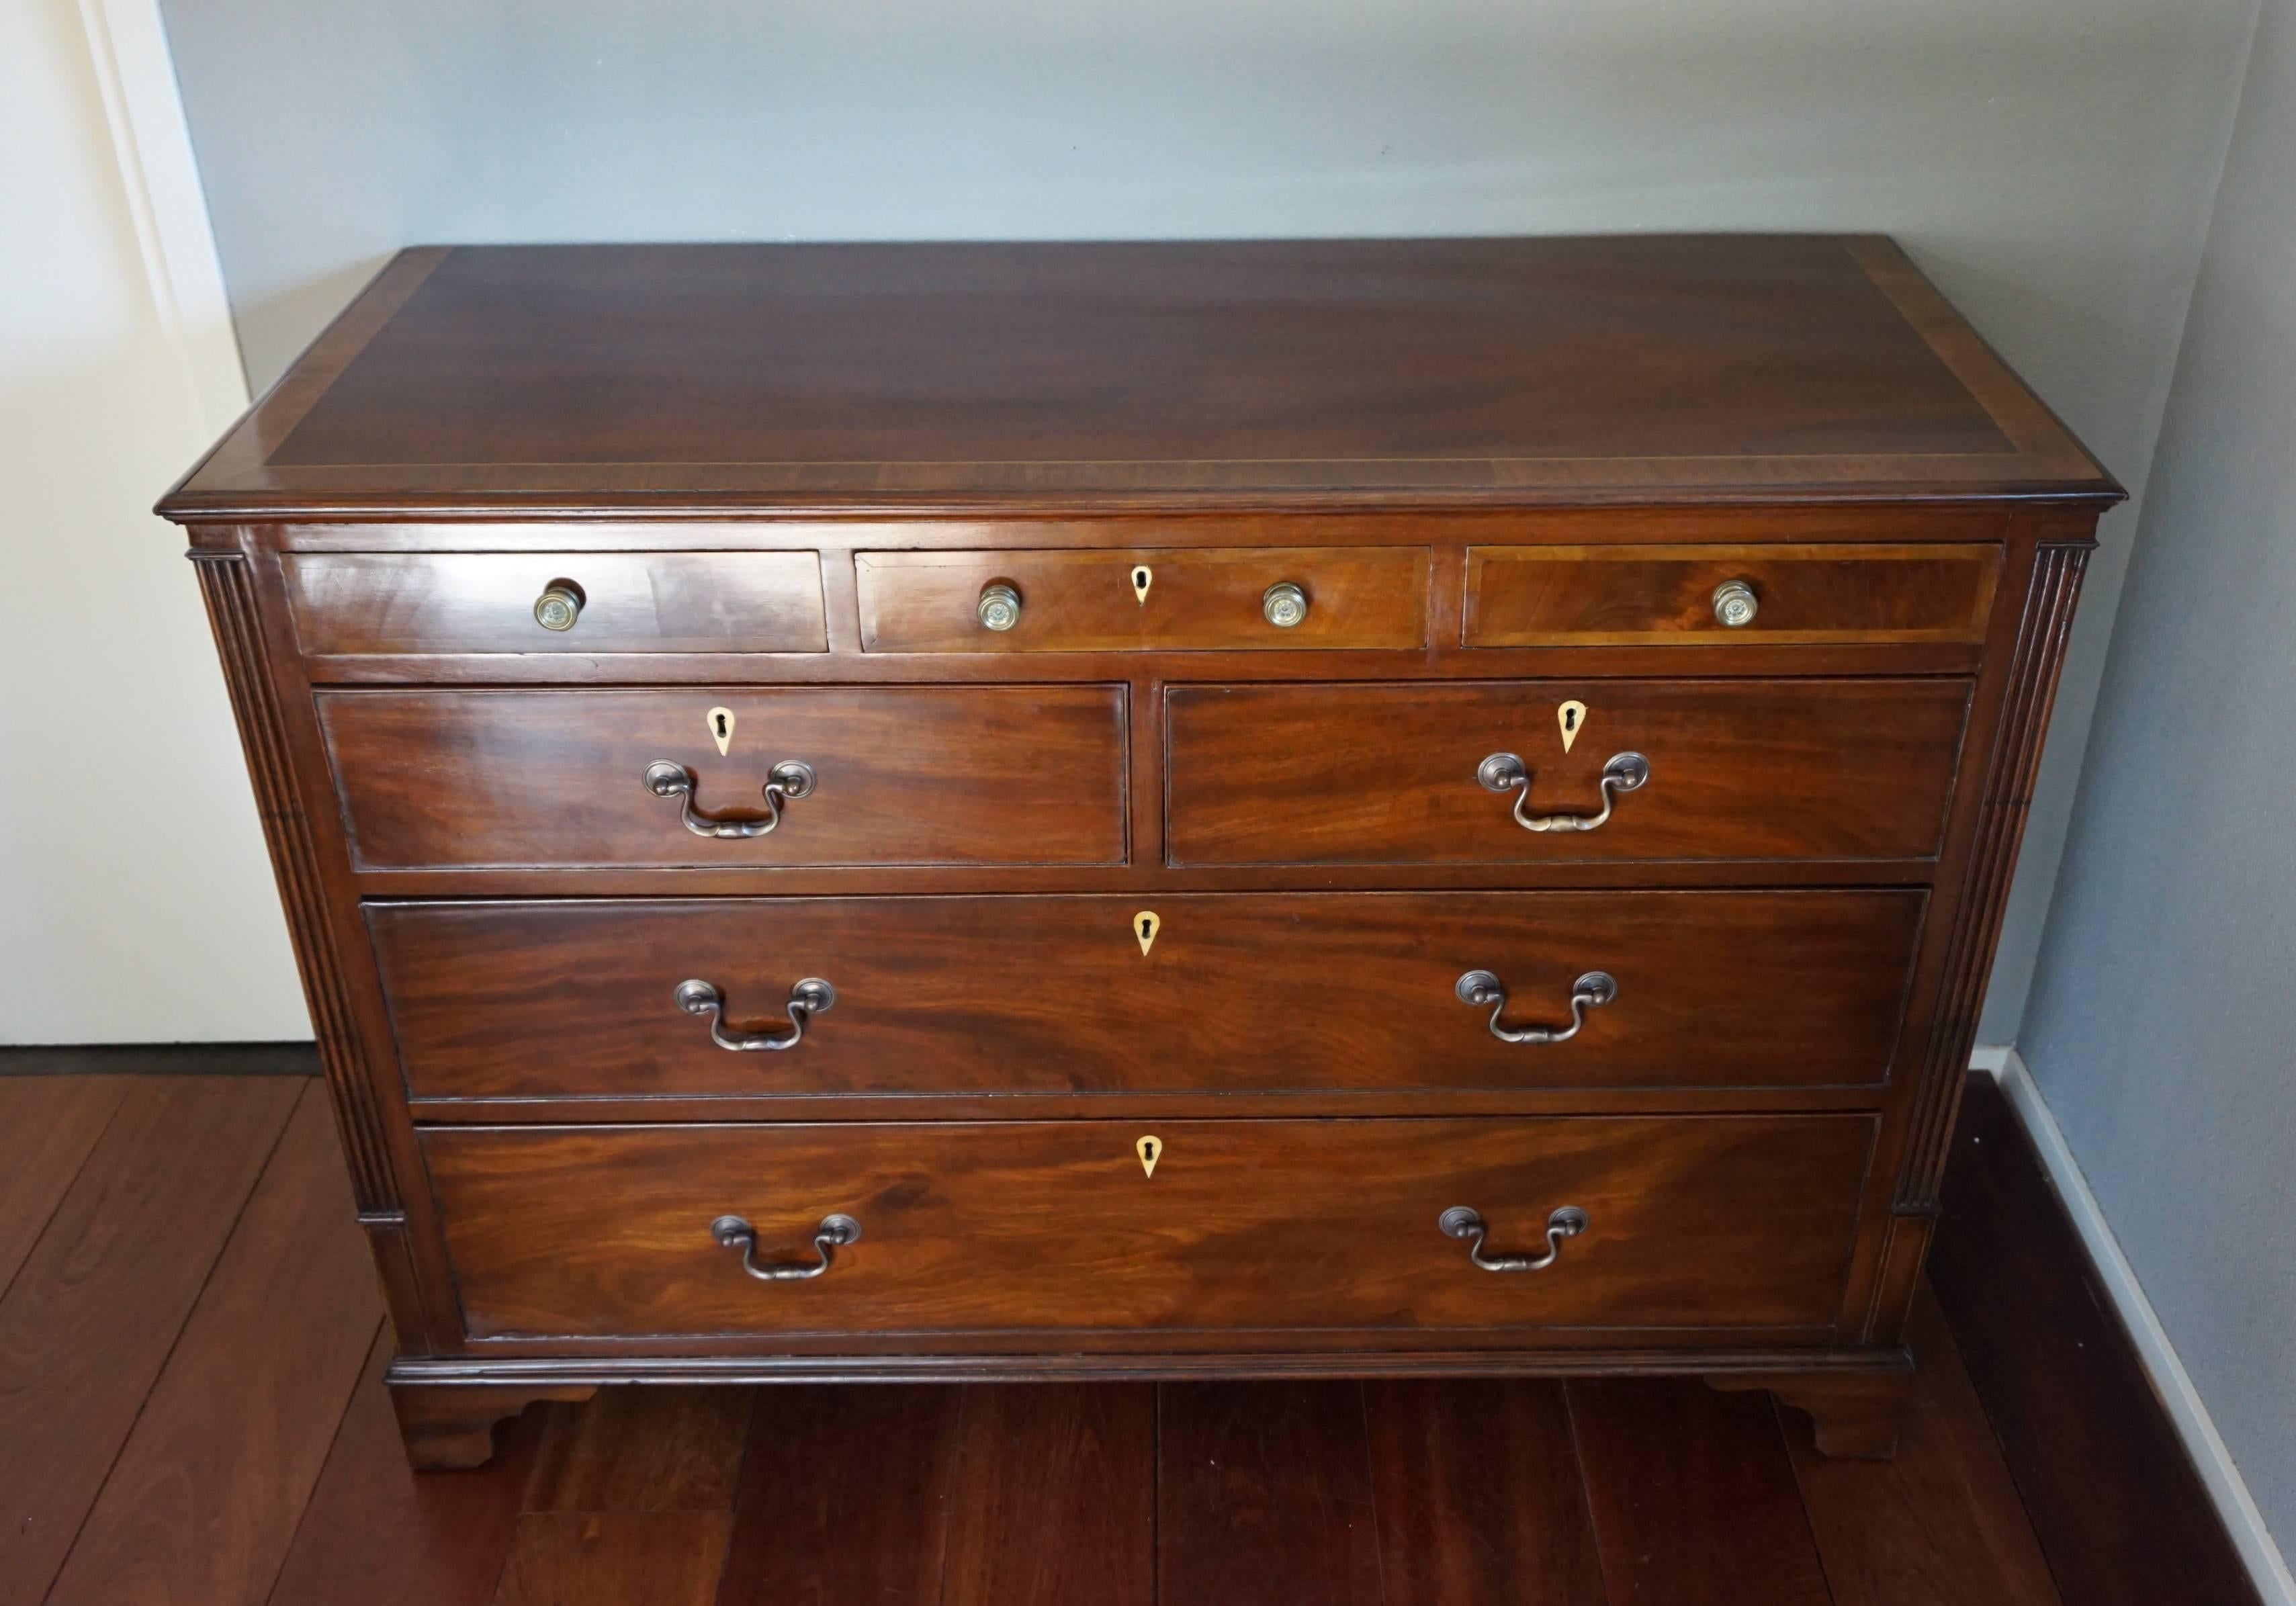 Rare, large and stunning late 1700s bachelor's chest.

In the late 18th century you would have had to be very wealthy to be able to buy this stunning & sizable bachelor's chest. A normal size one would have been very expensive, but this large and